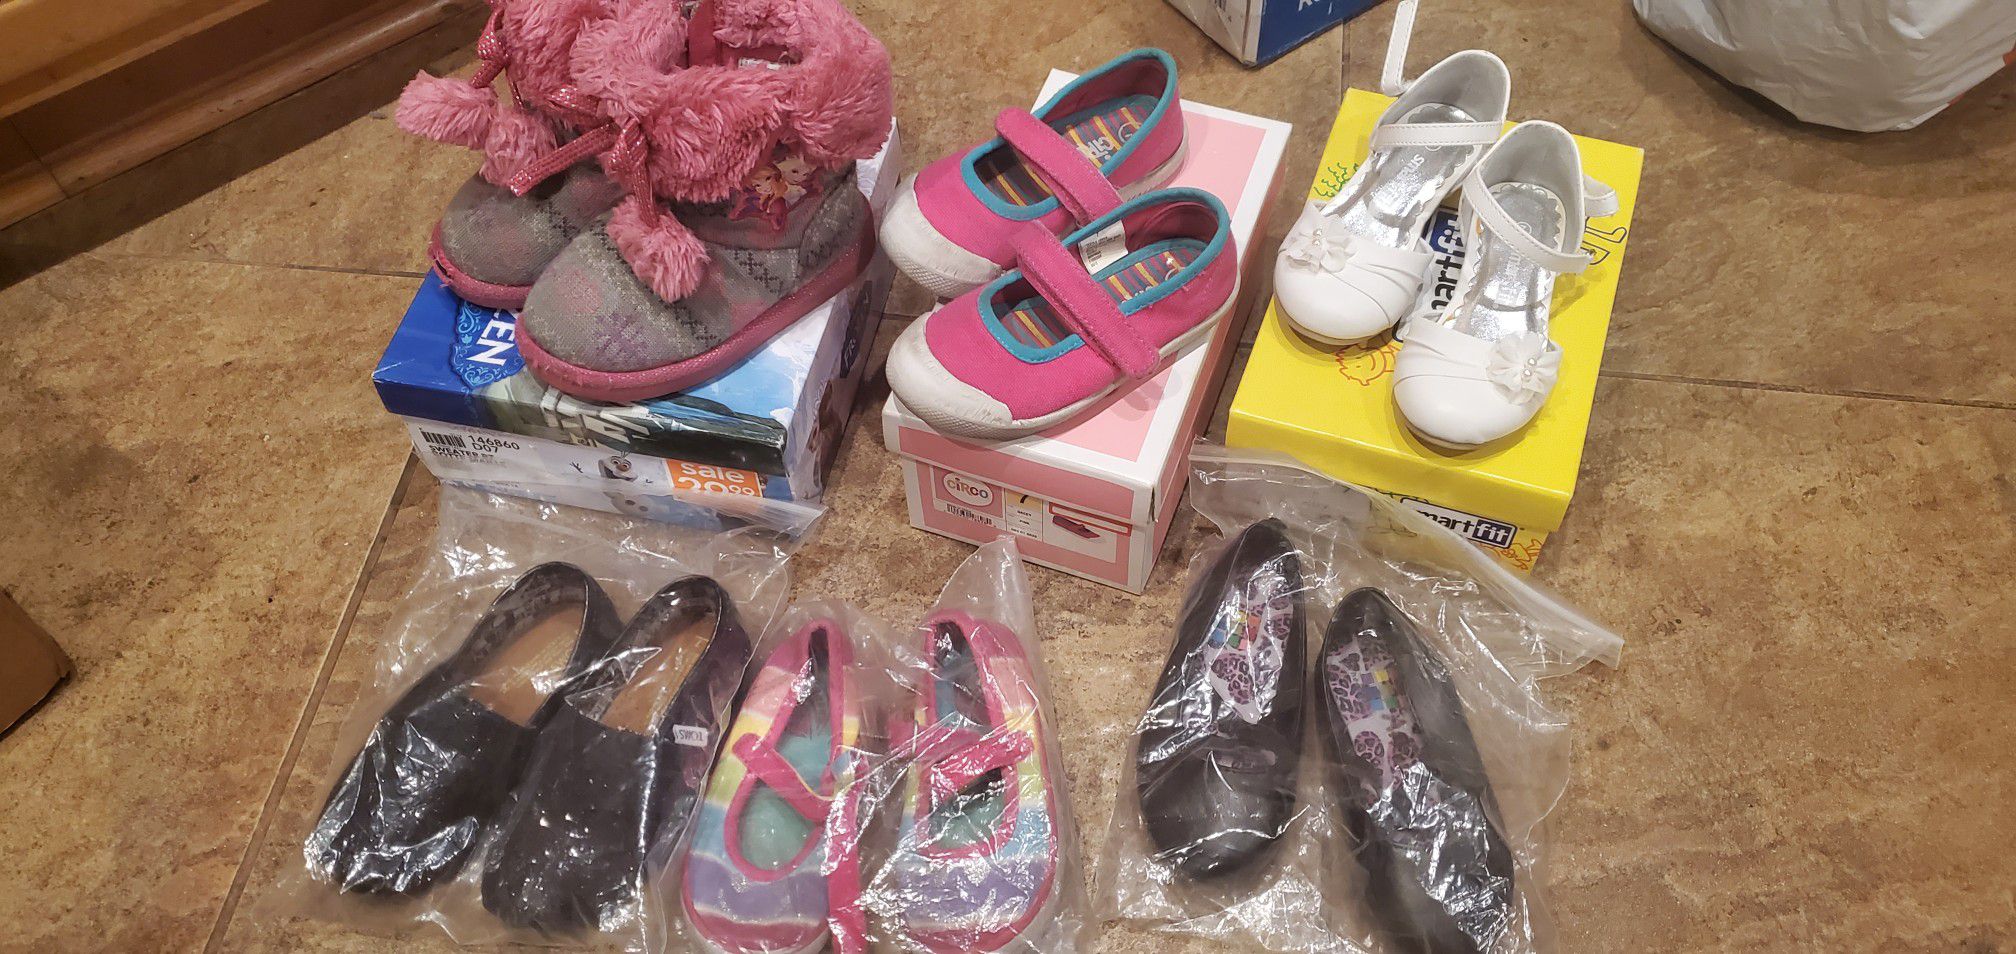 *PENDING PICK-UP* FREE - Size 7 Kids/Girls Shoes